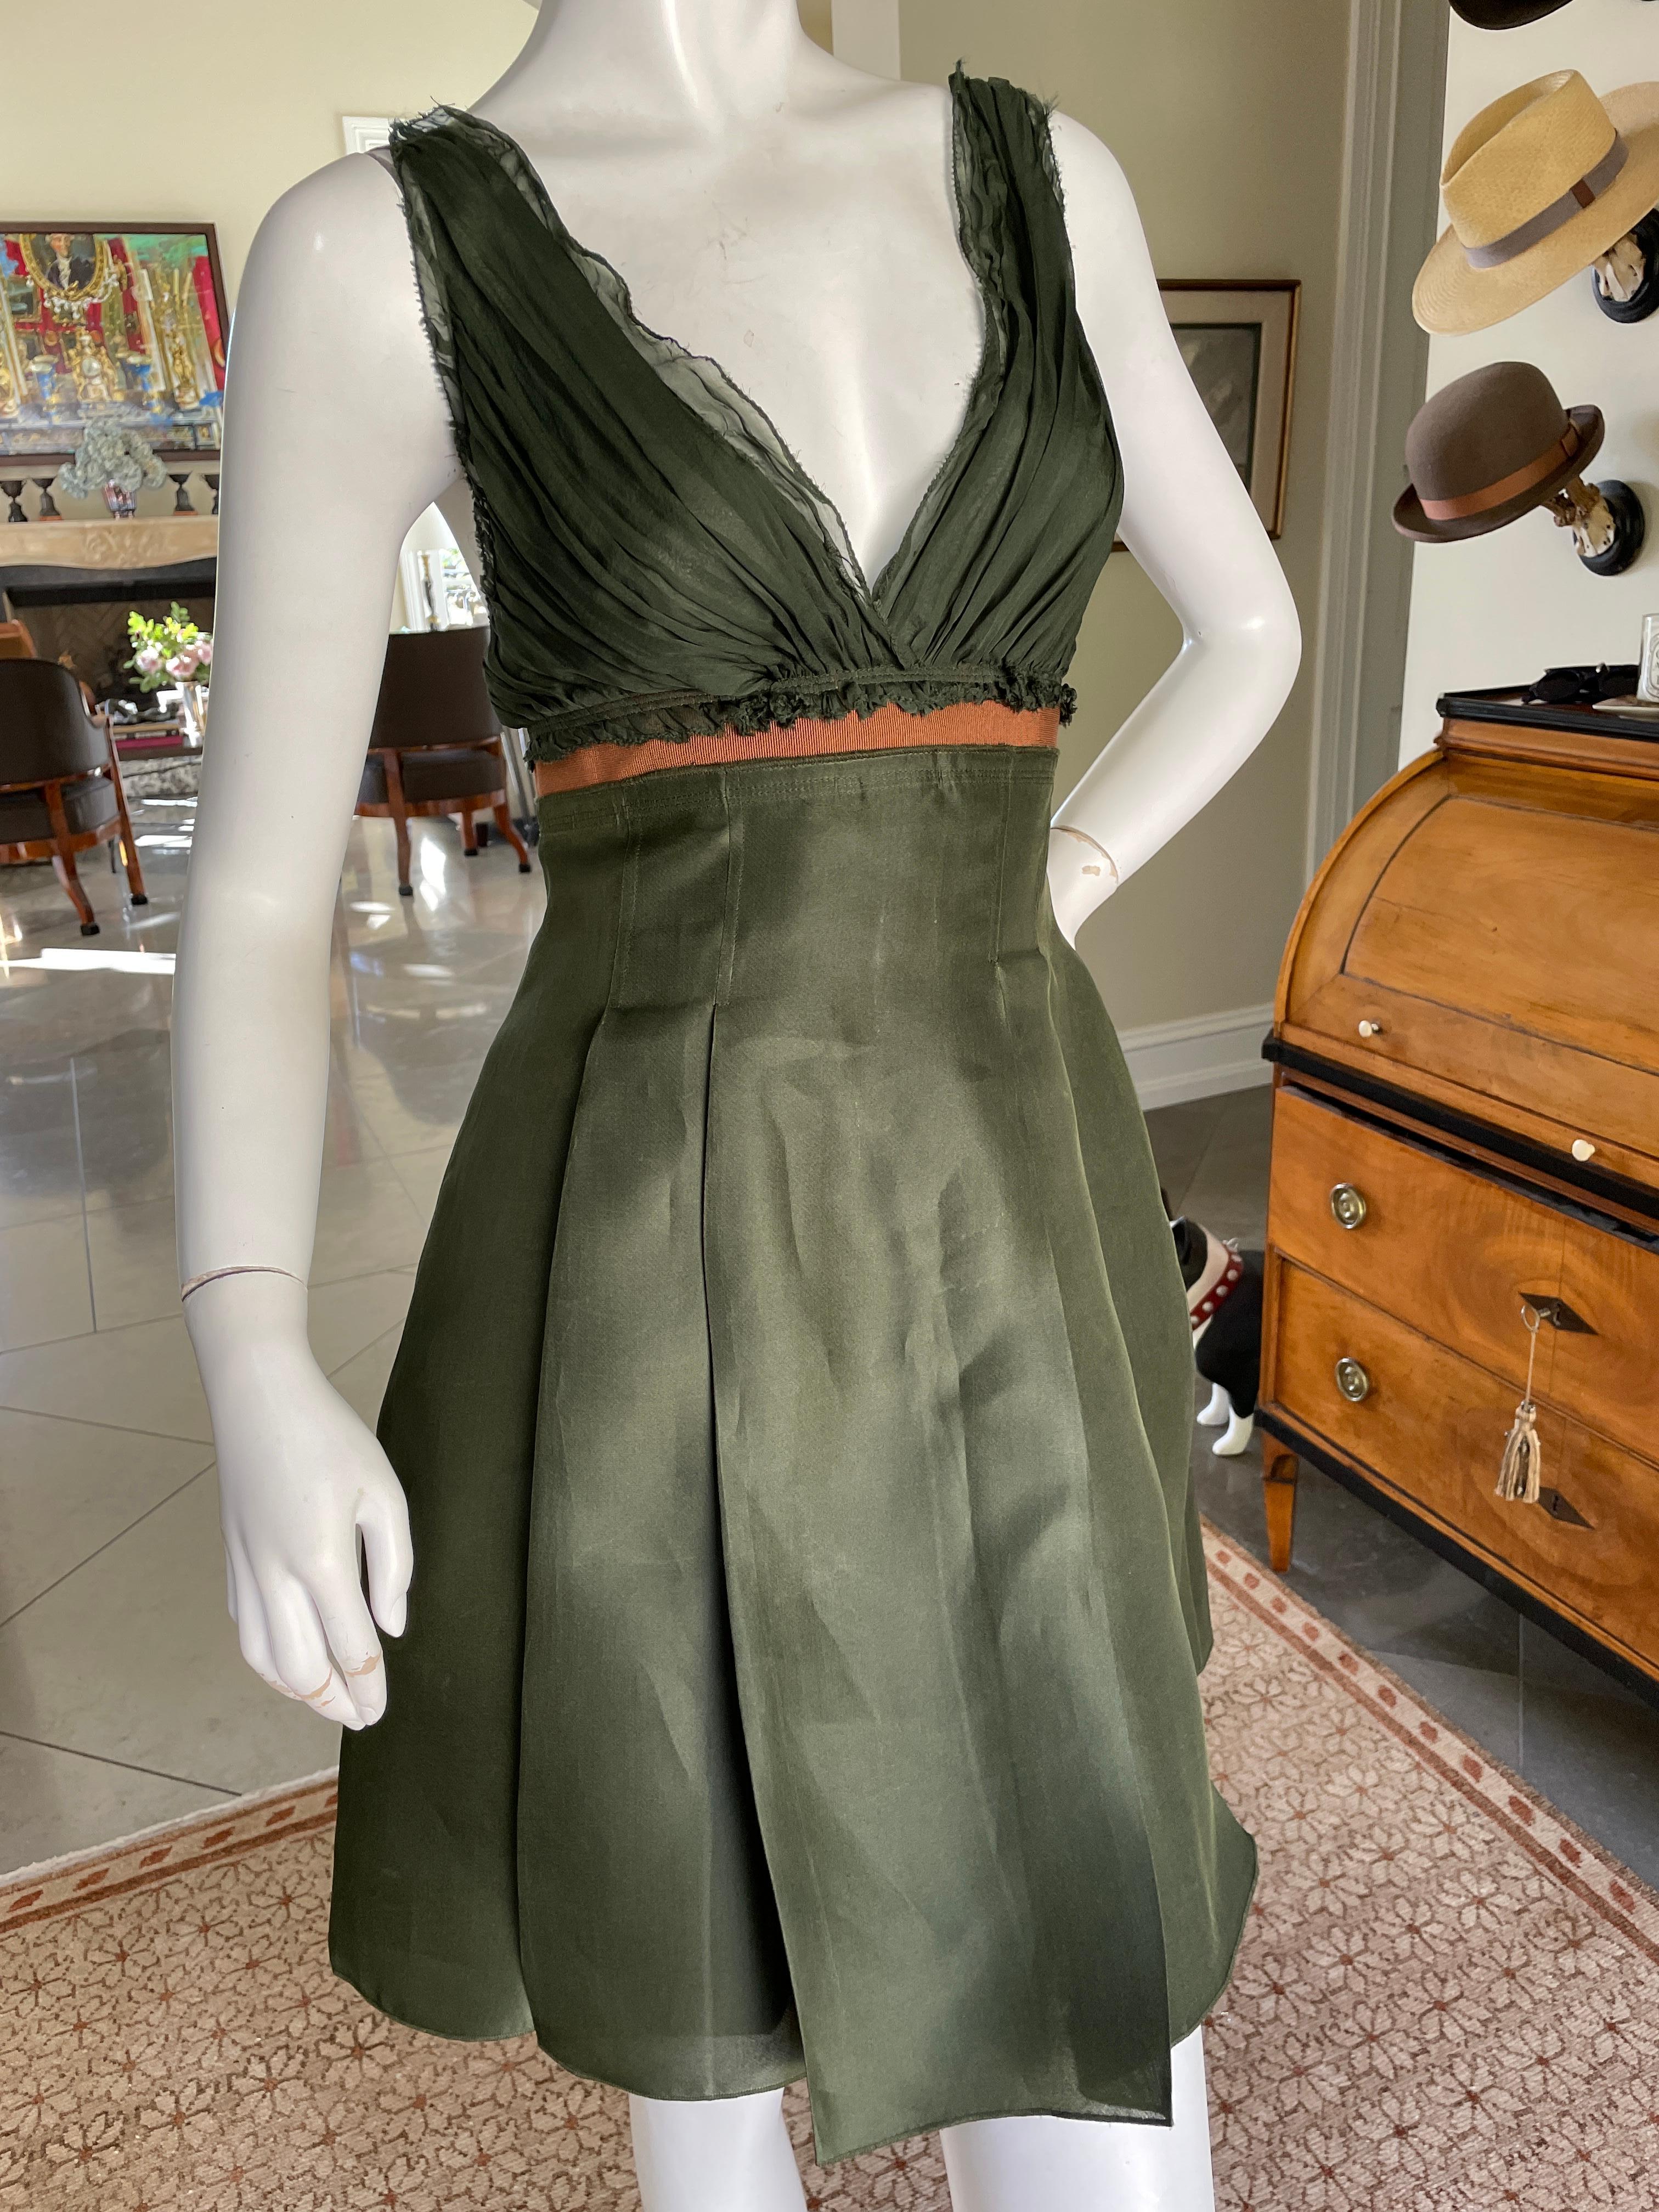 D&G by Dolce & Gabbana Vintage Green Silk Cocktail Dress In Excellent Condition For Sale In Cloverdale, CA